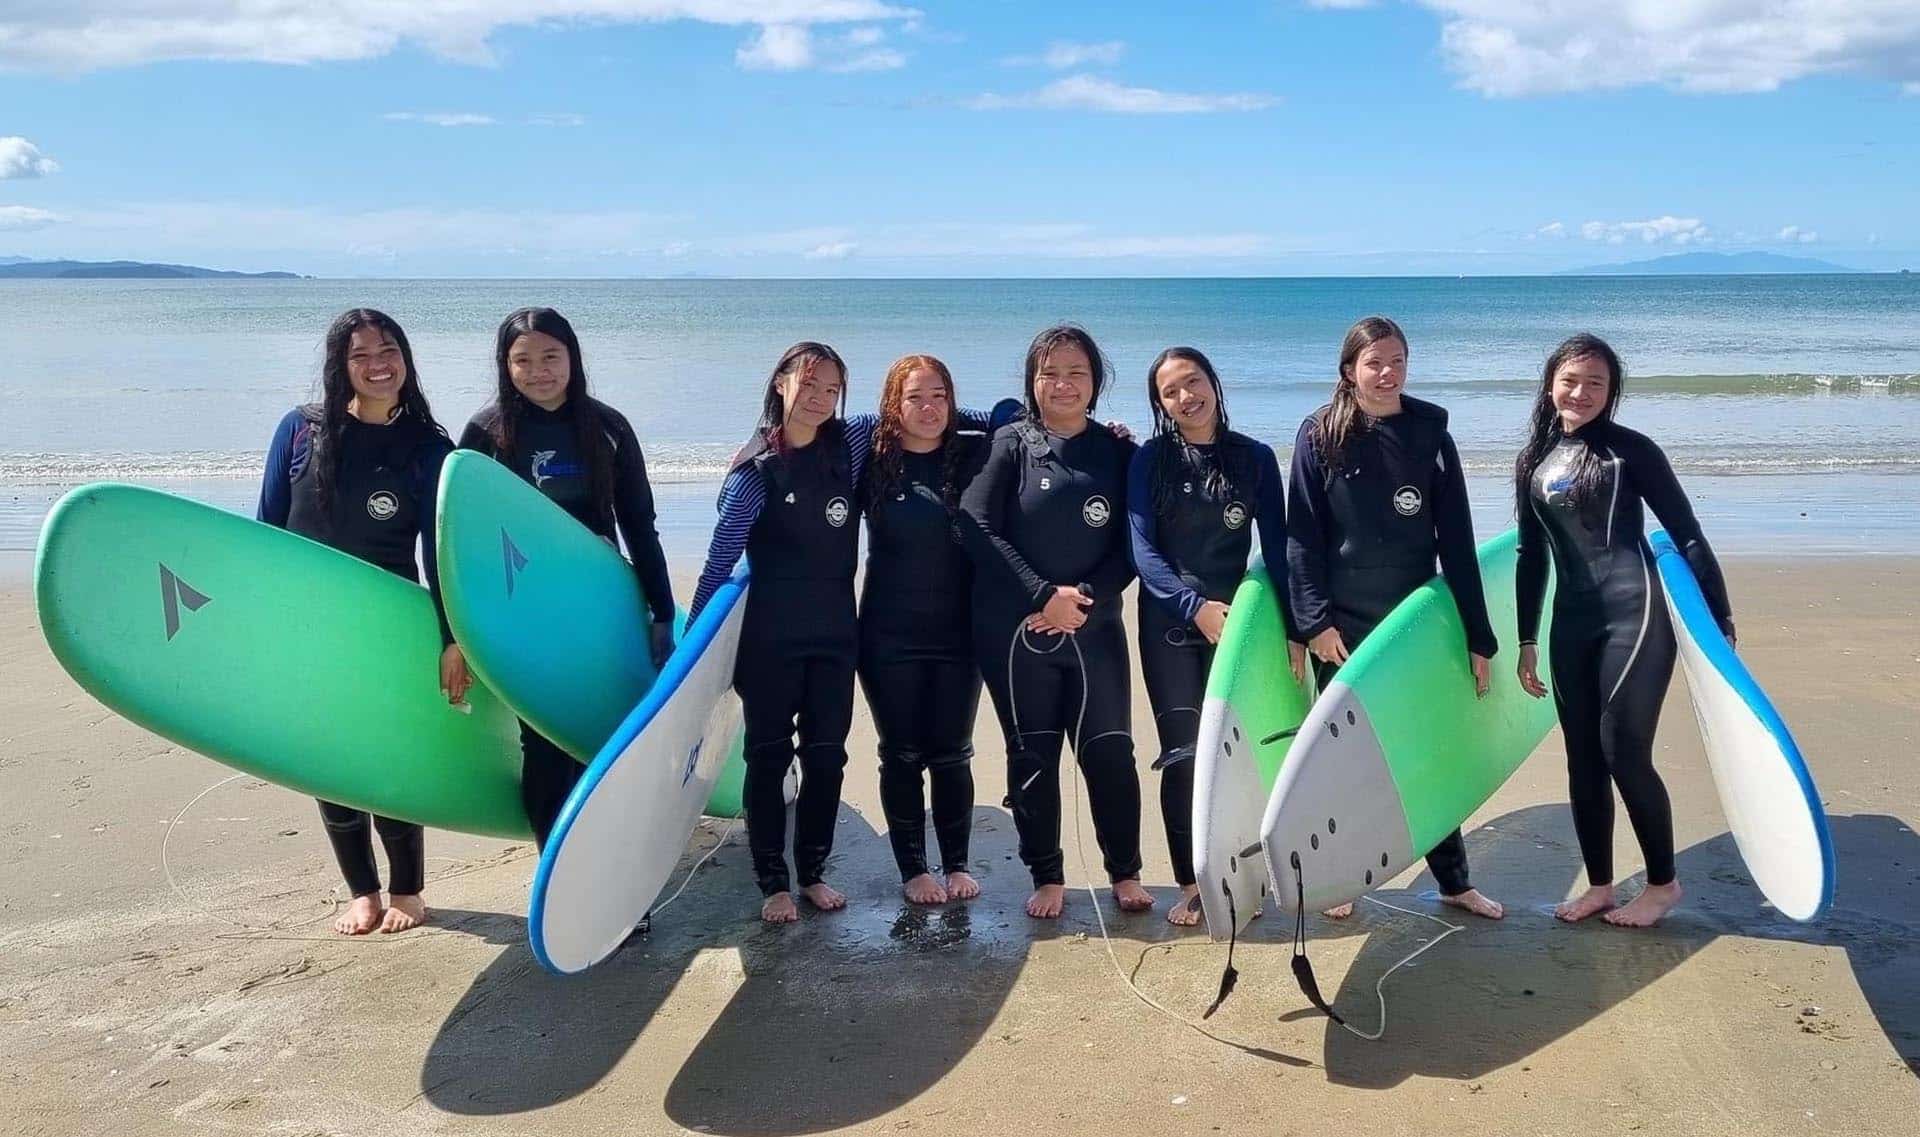 Massey High students give surfing a go